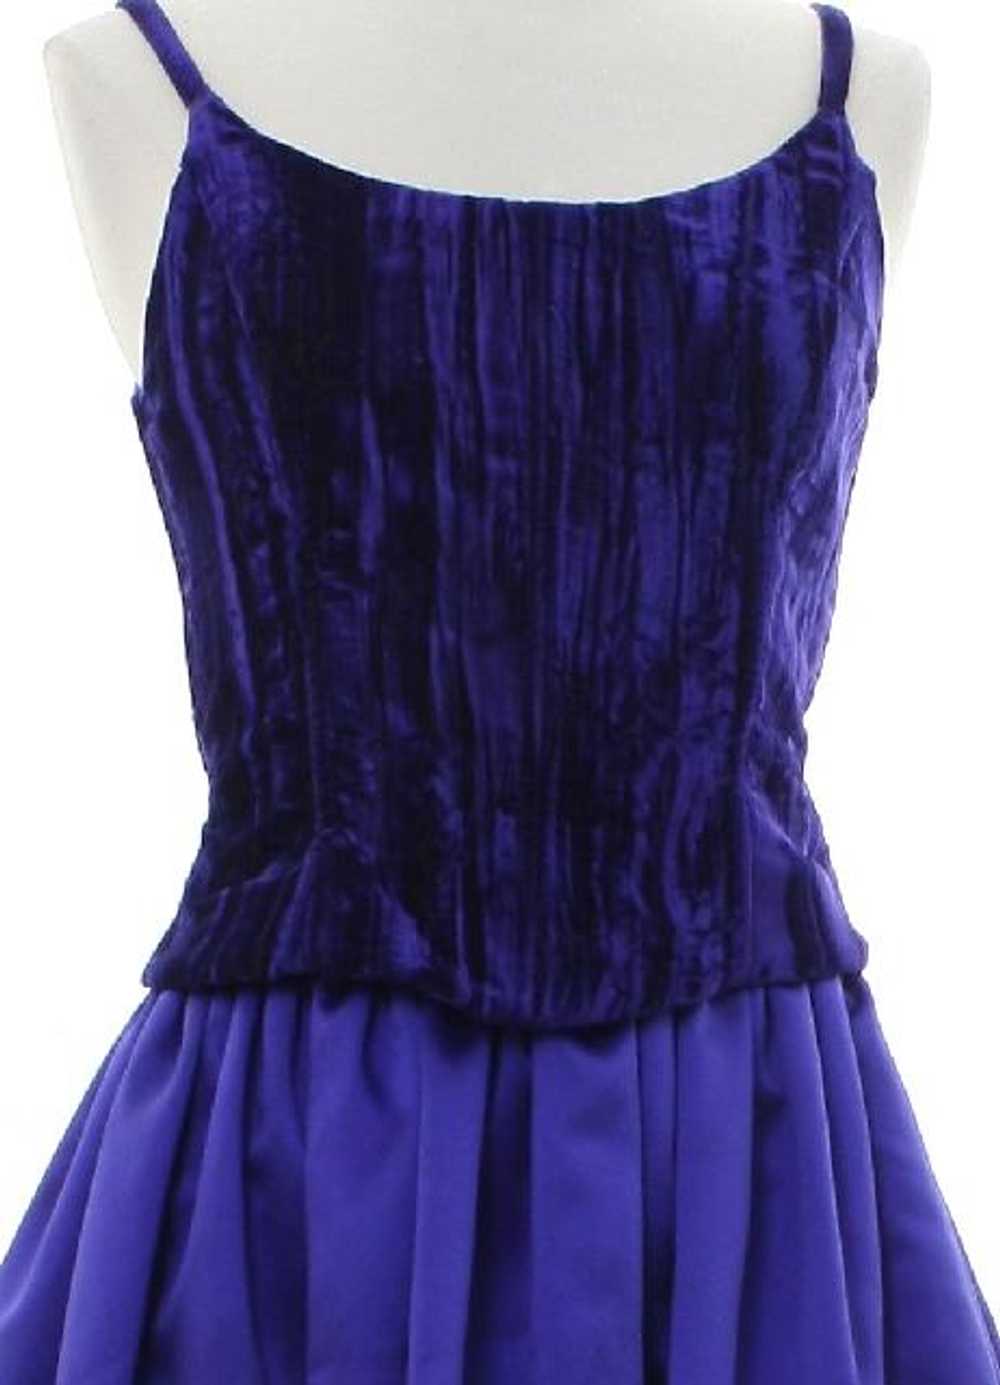 1980's Totally 80s Prom Or Cocktail Dress - image 2